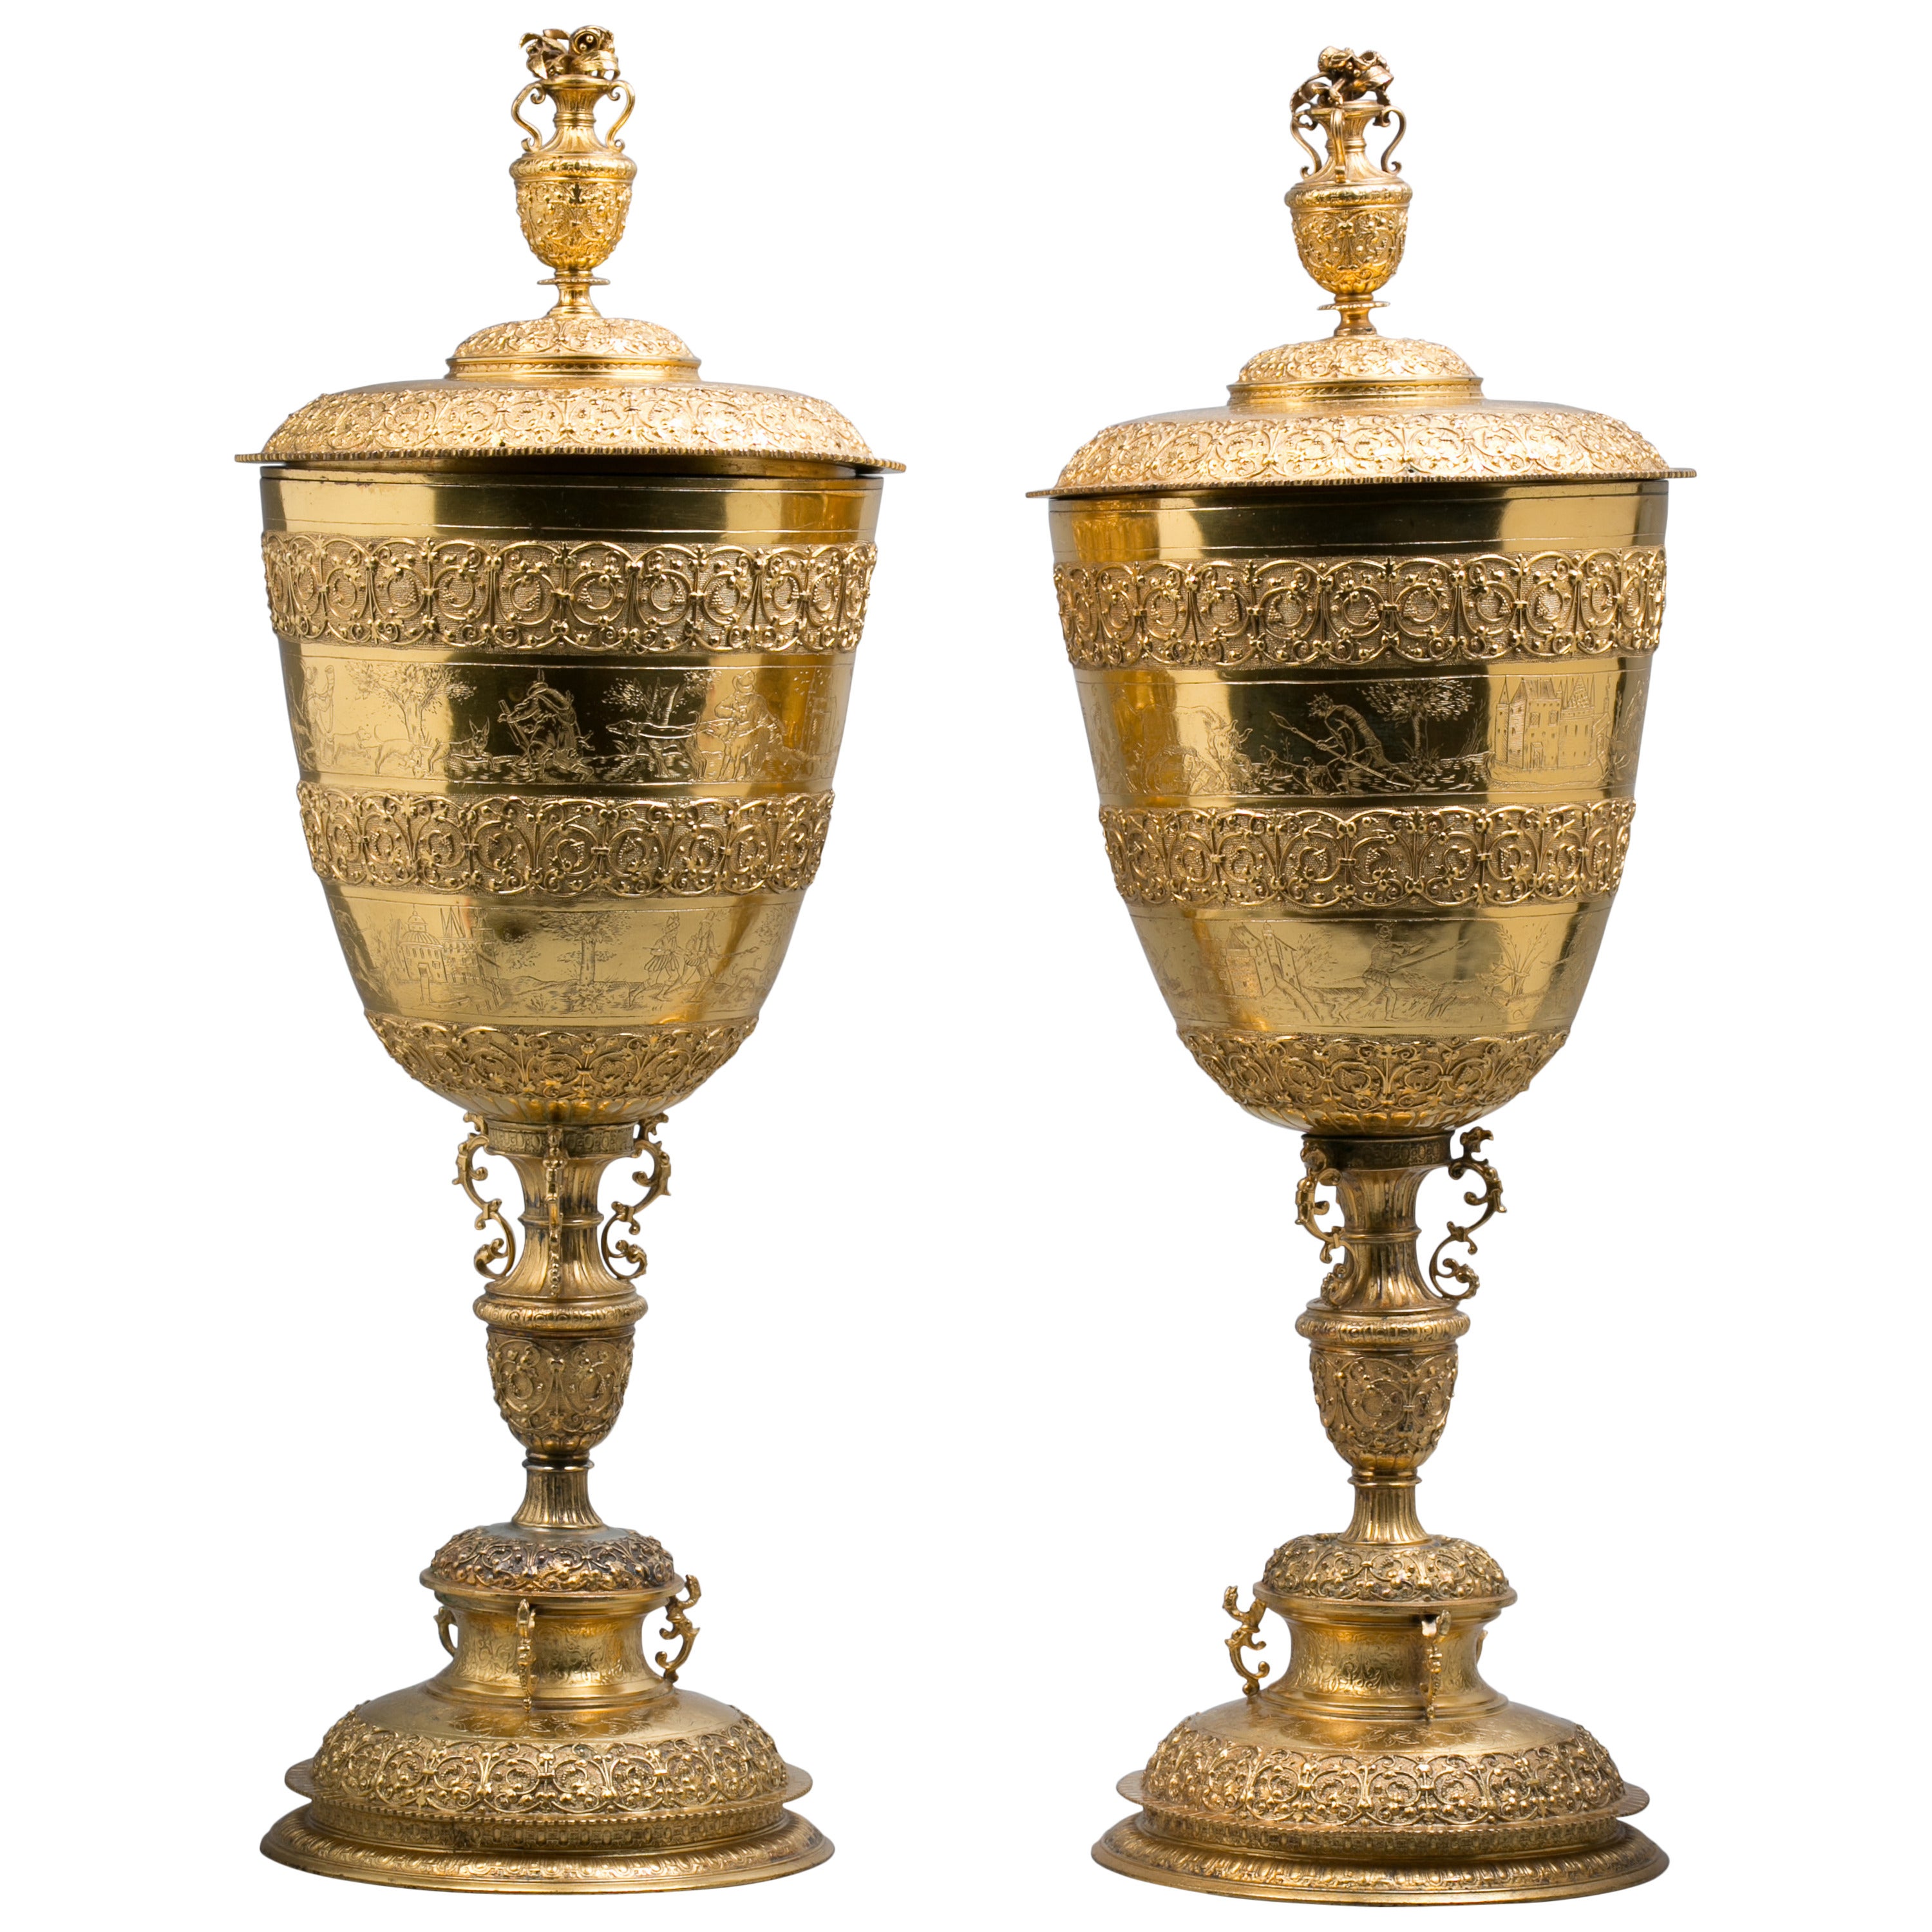 Pair of Large English Gilt Metal Standing Cups and Covers, circa 1890